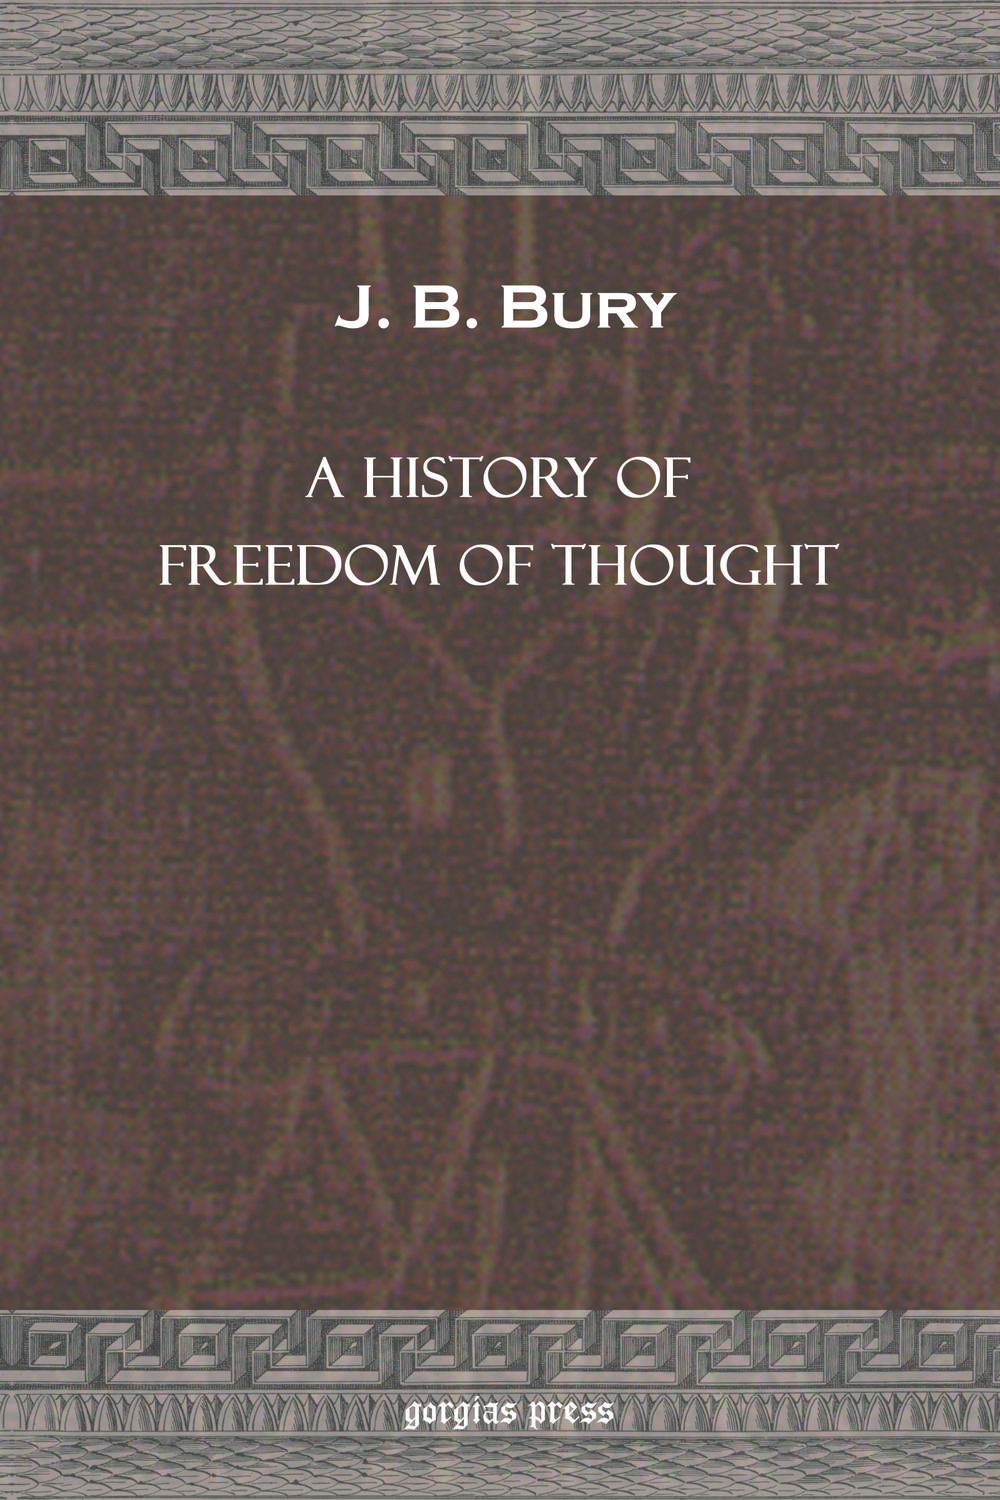 A History of Freedom of Thought - J. B. Bury,,